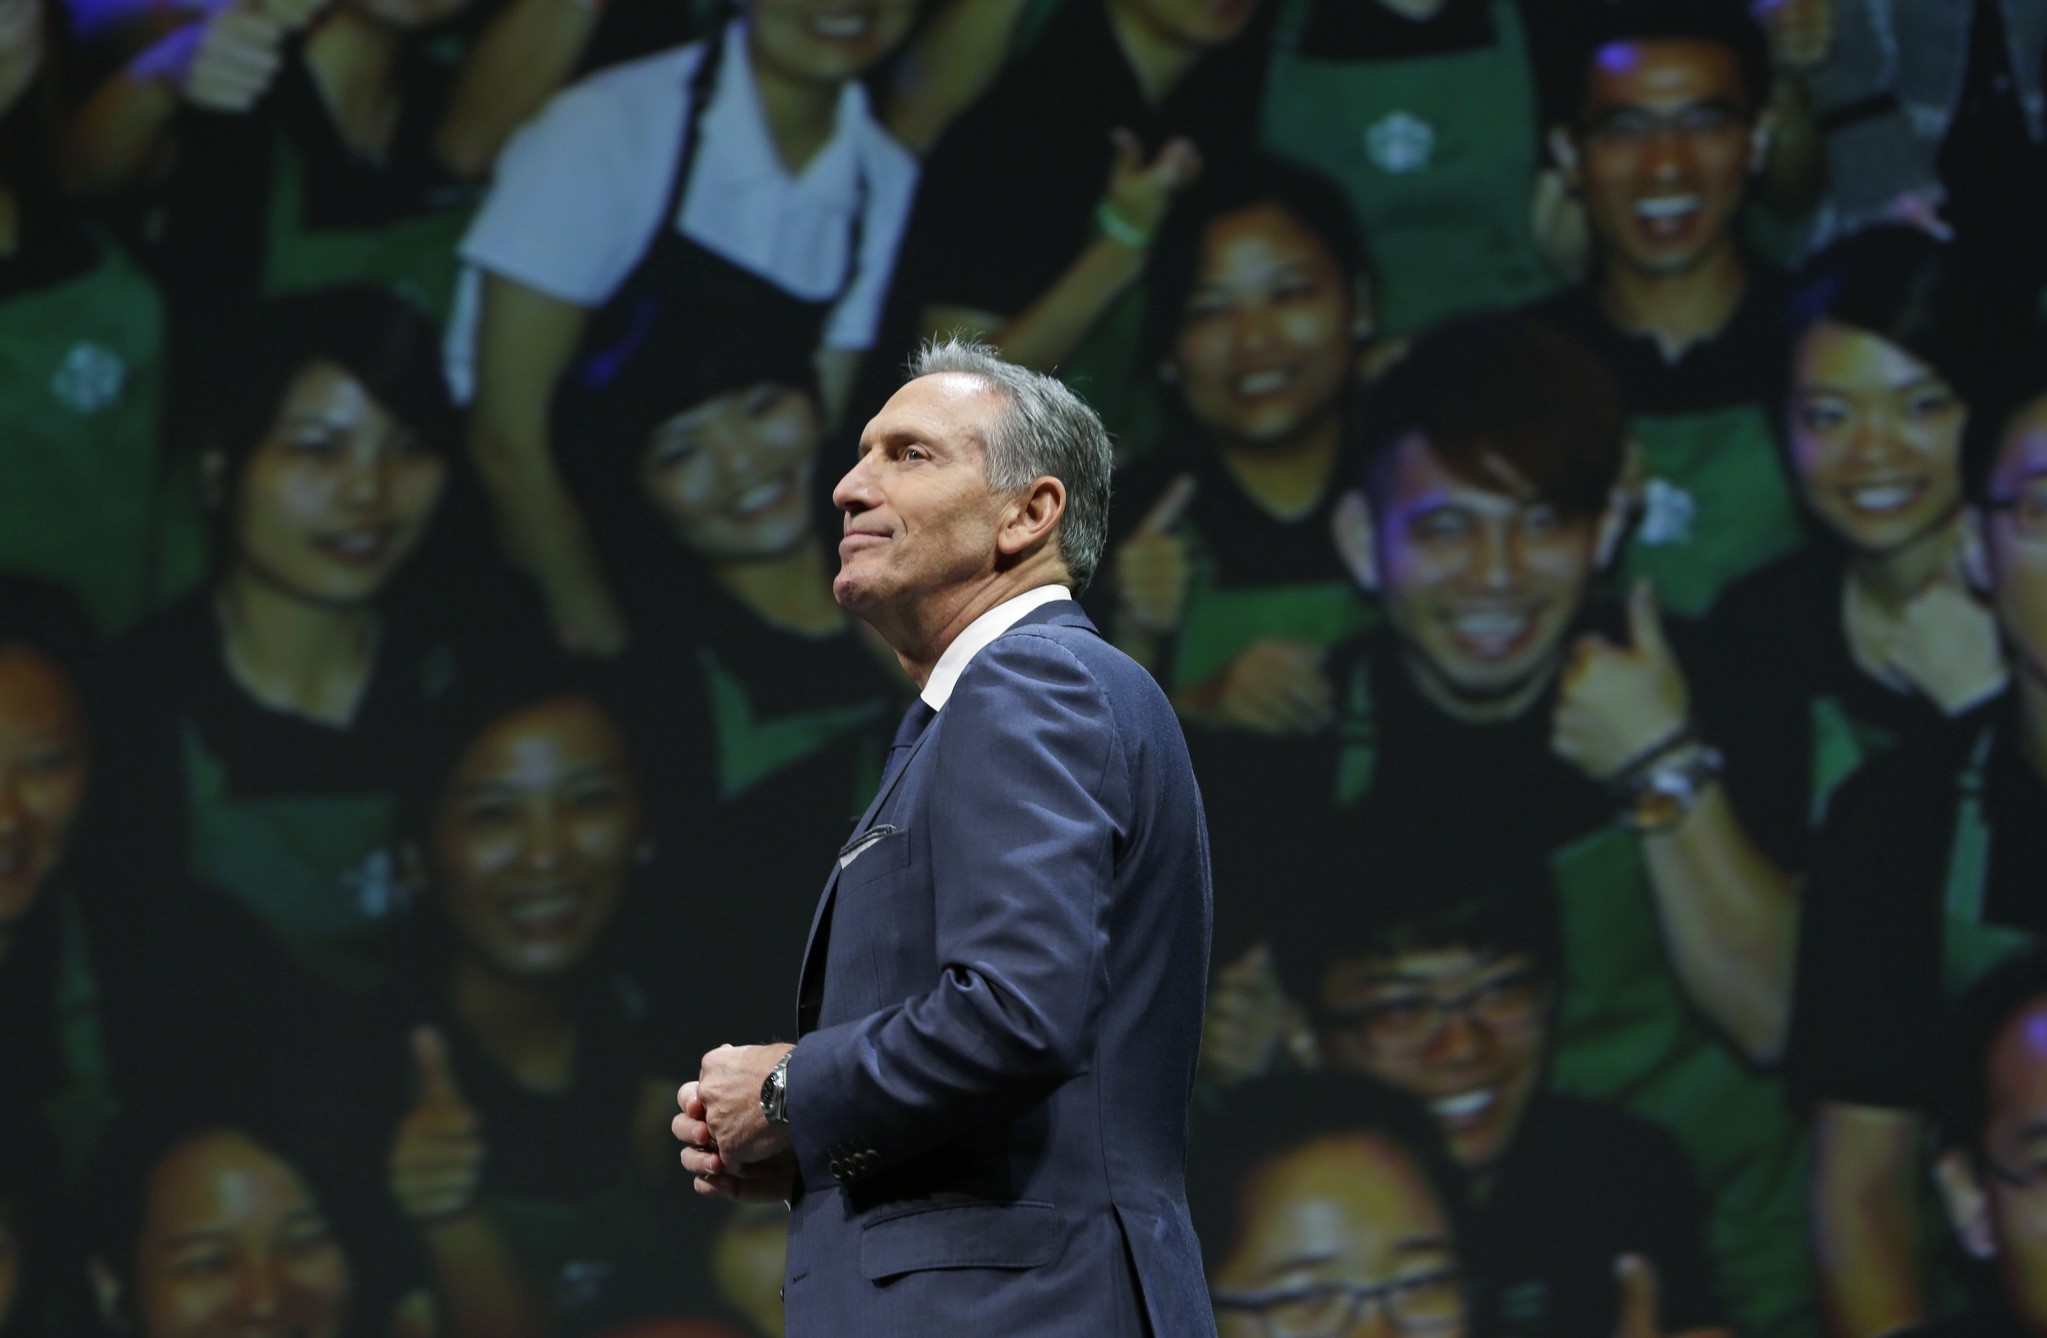 Starbucks CEO Howard Schultz walks in front of a photo of Starbucks baristas, at the coffee company's annual shareholders meeting in Seattle. (AP Photo)